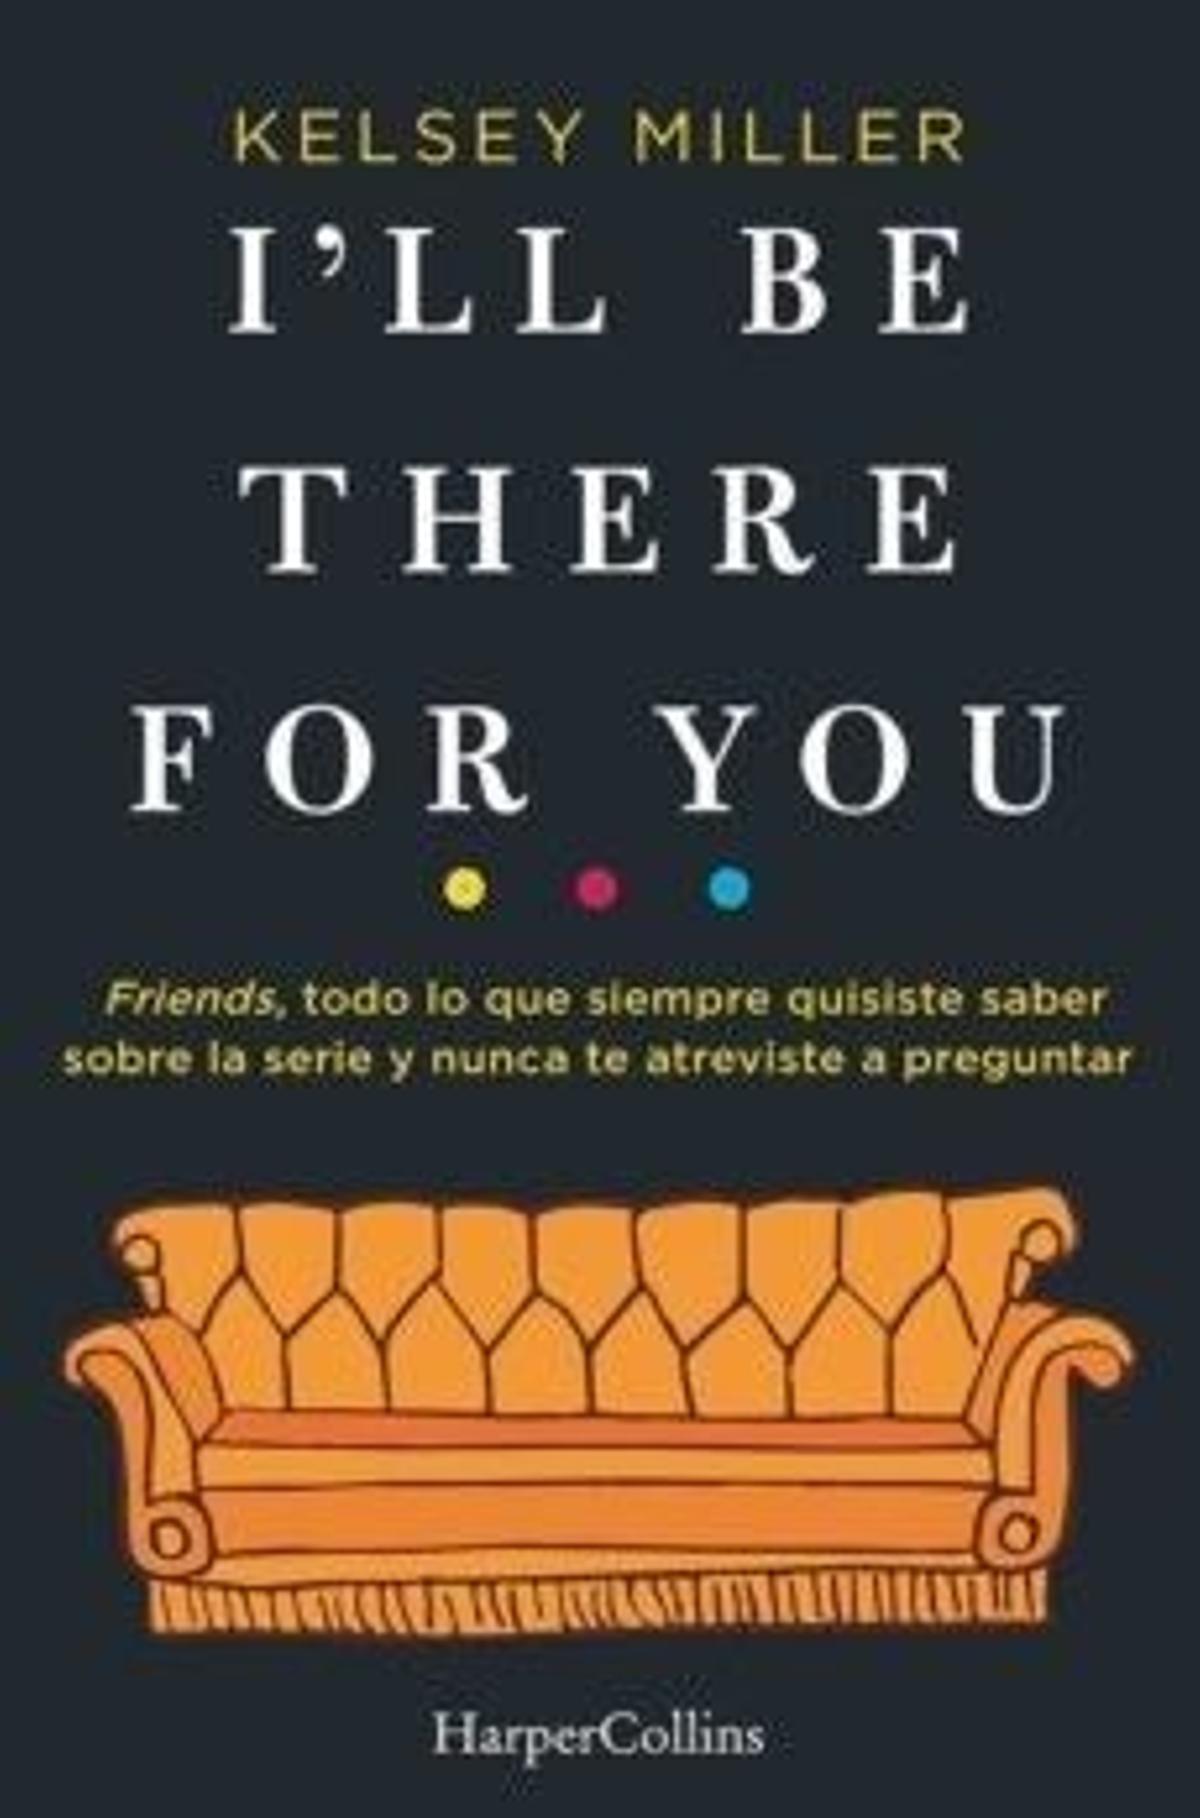 Libro 'I'll be there for you'